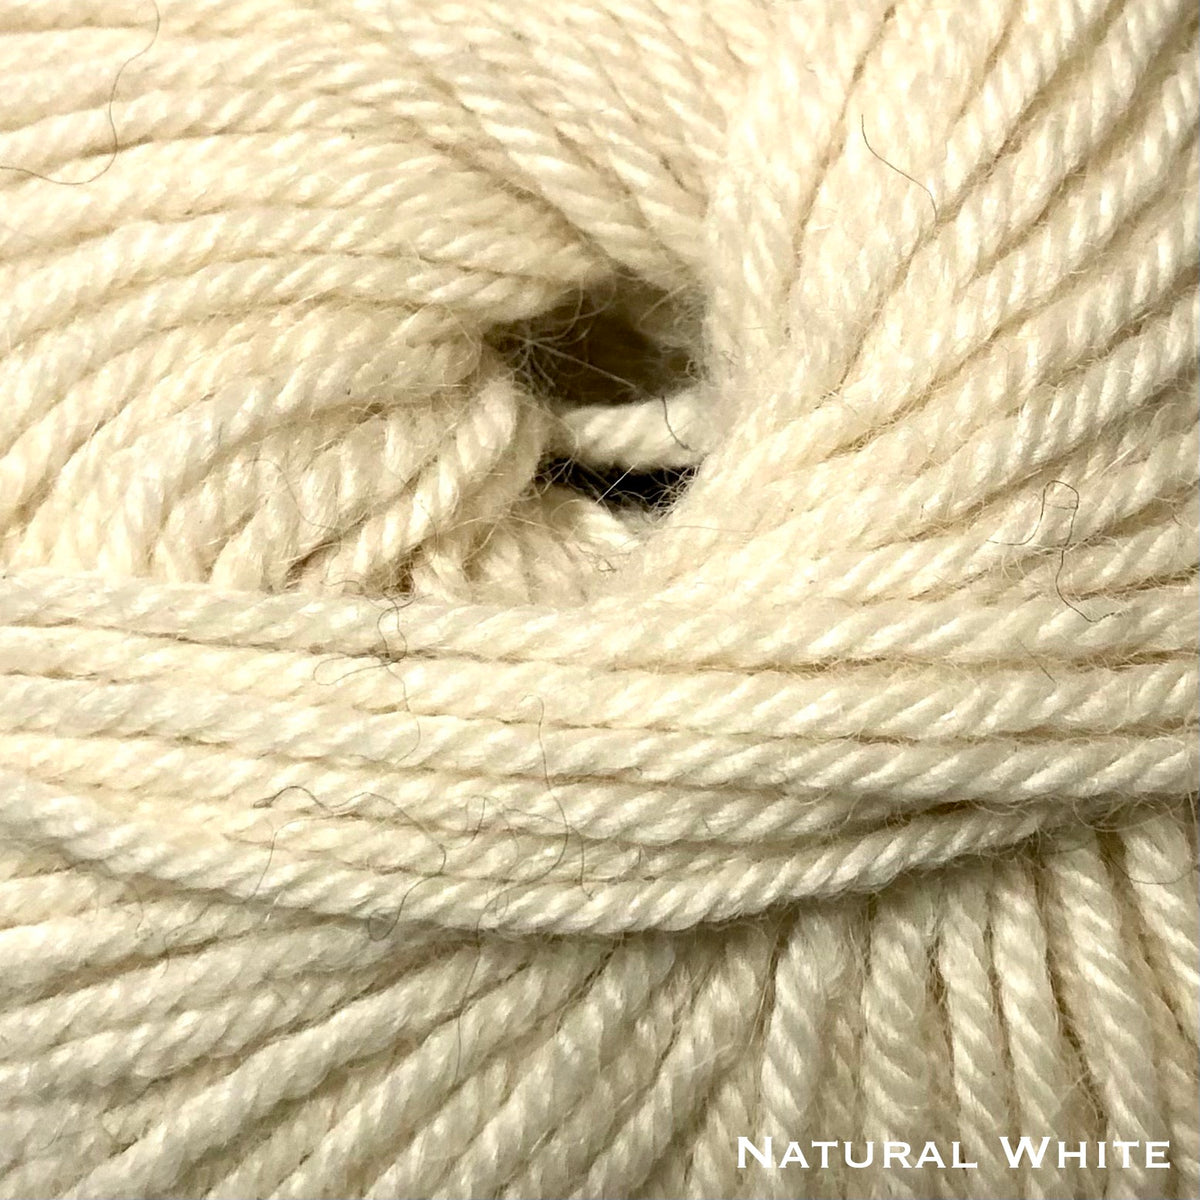 natural white sport weight alpaca wool yarn for knitting and crochet